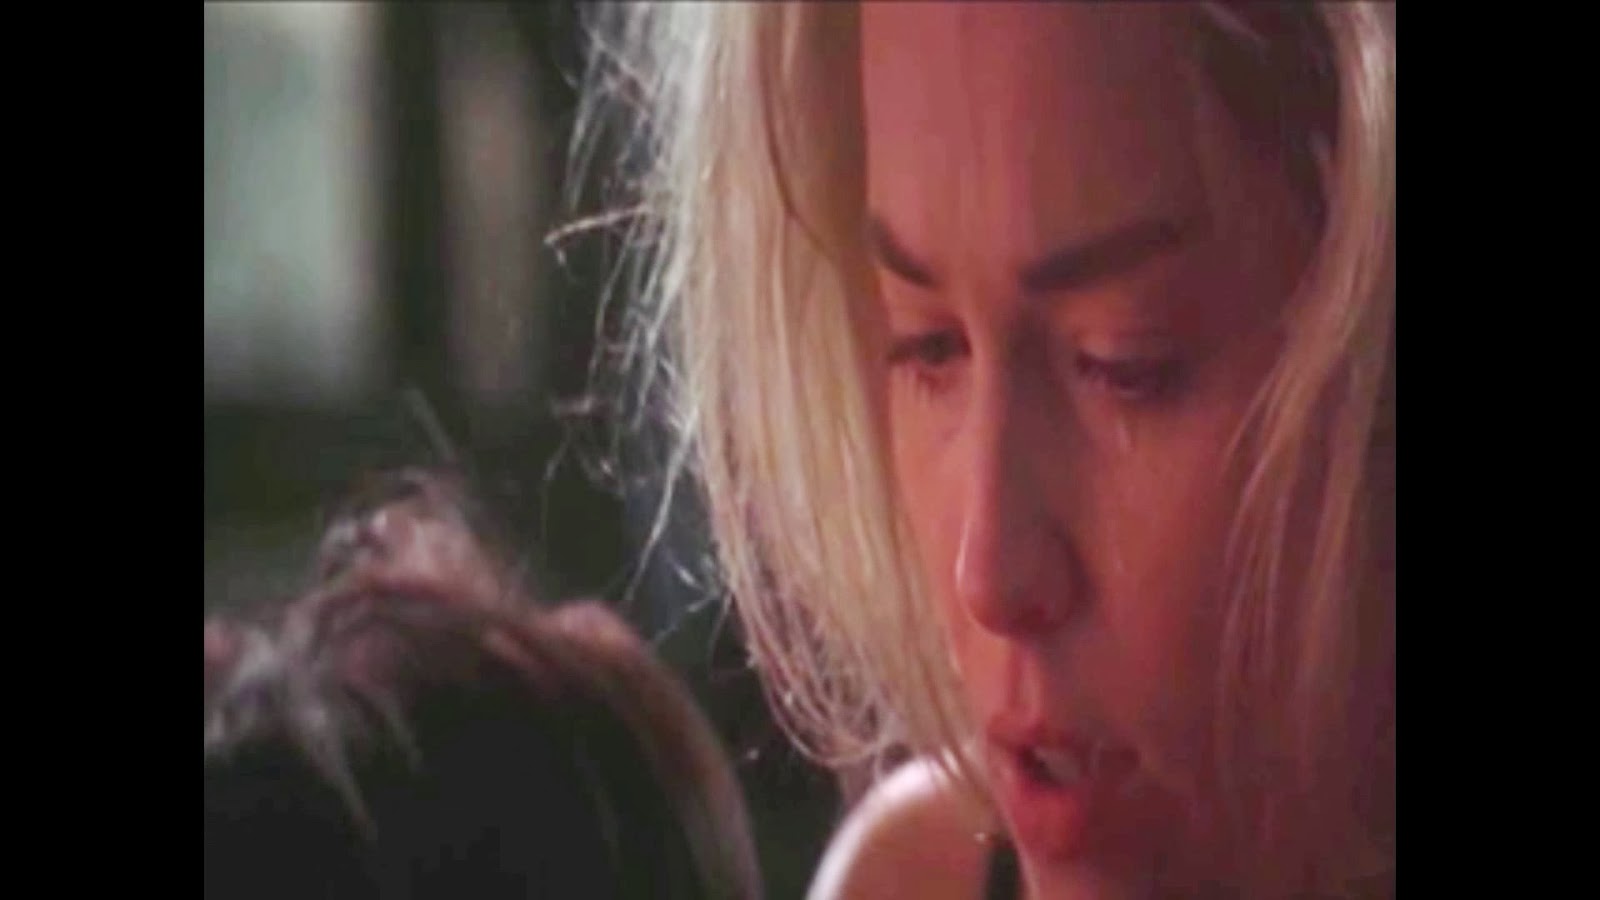 Hollywood Sexy Actress Video Clips Of Sharon Stone 12